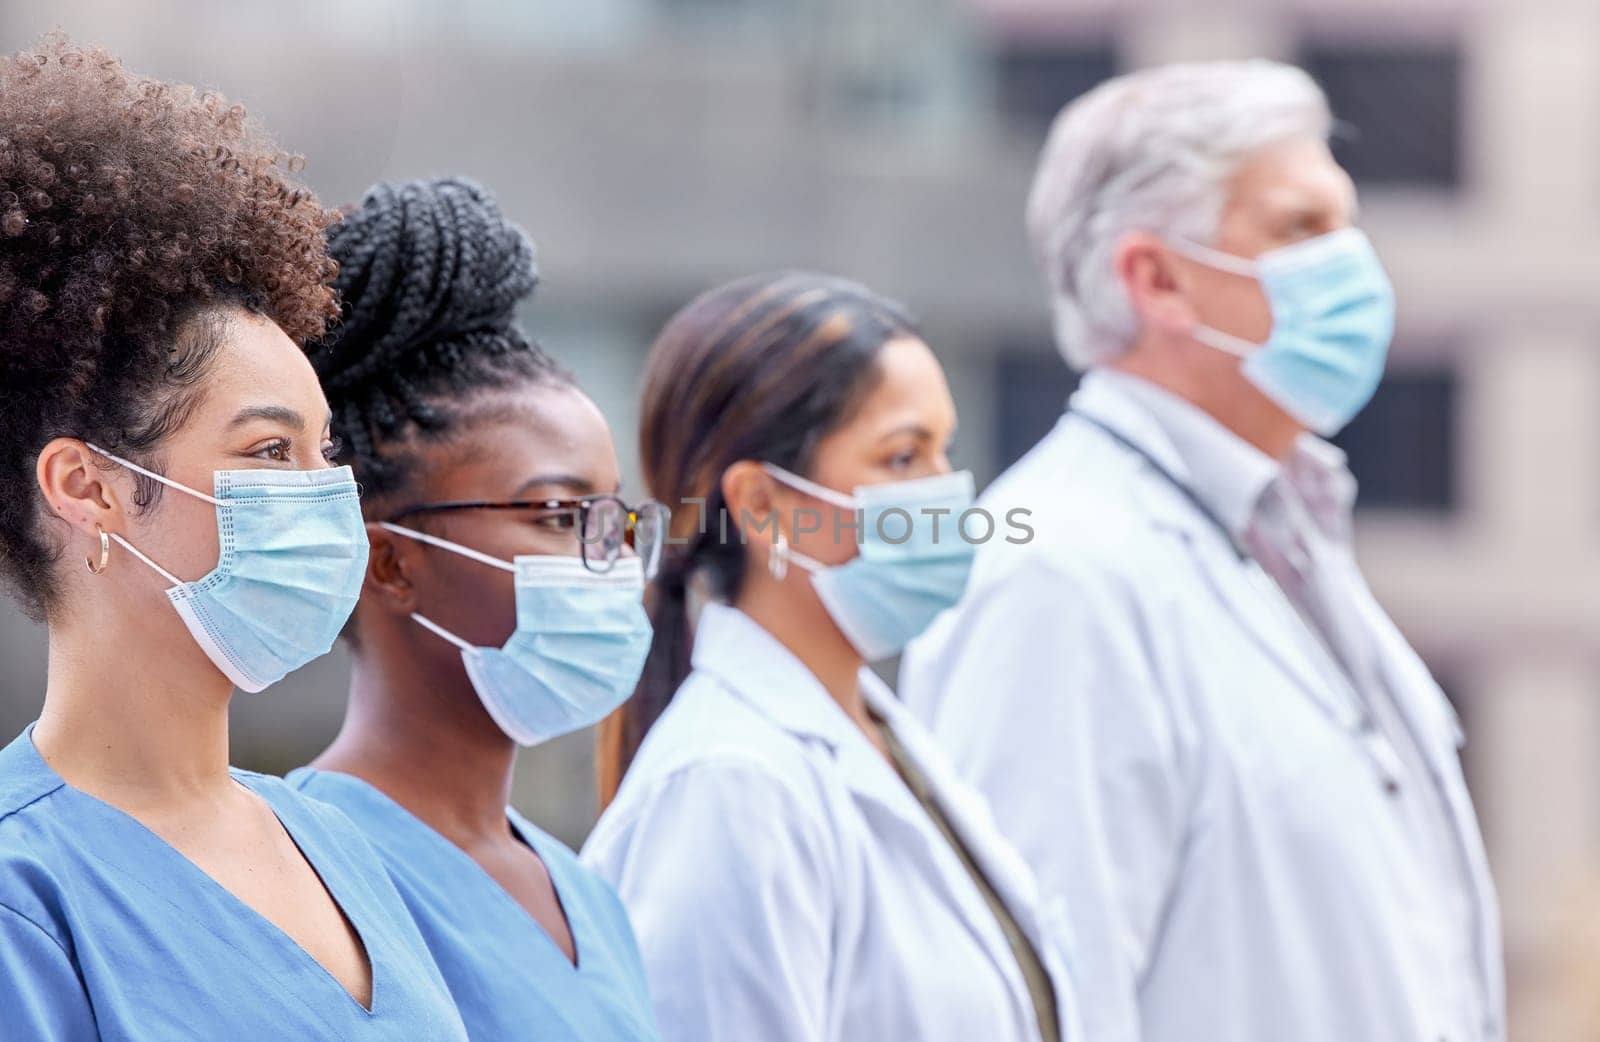 City, healthcare and doctors with mask for teamwork, collaboration and support for clinic staff. Hospital, nursing and men and women in row for medical care, service and wellness in pandemic safety by YuriArcurs